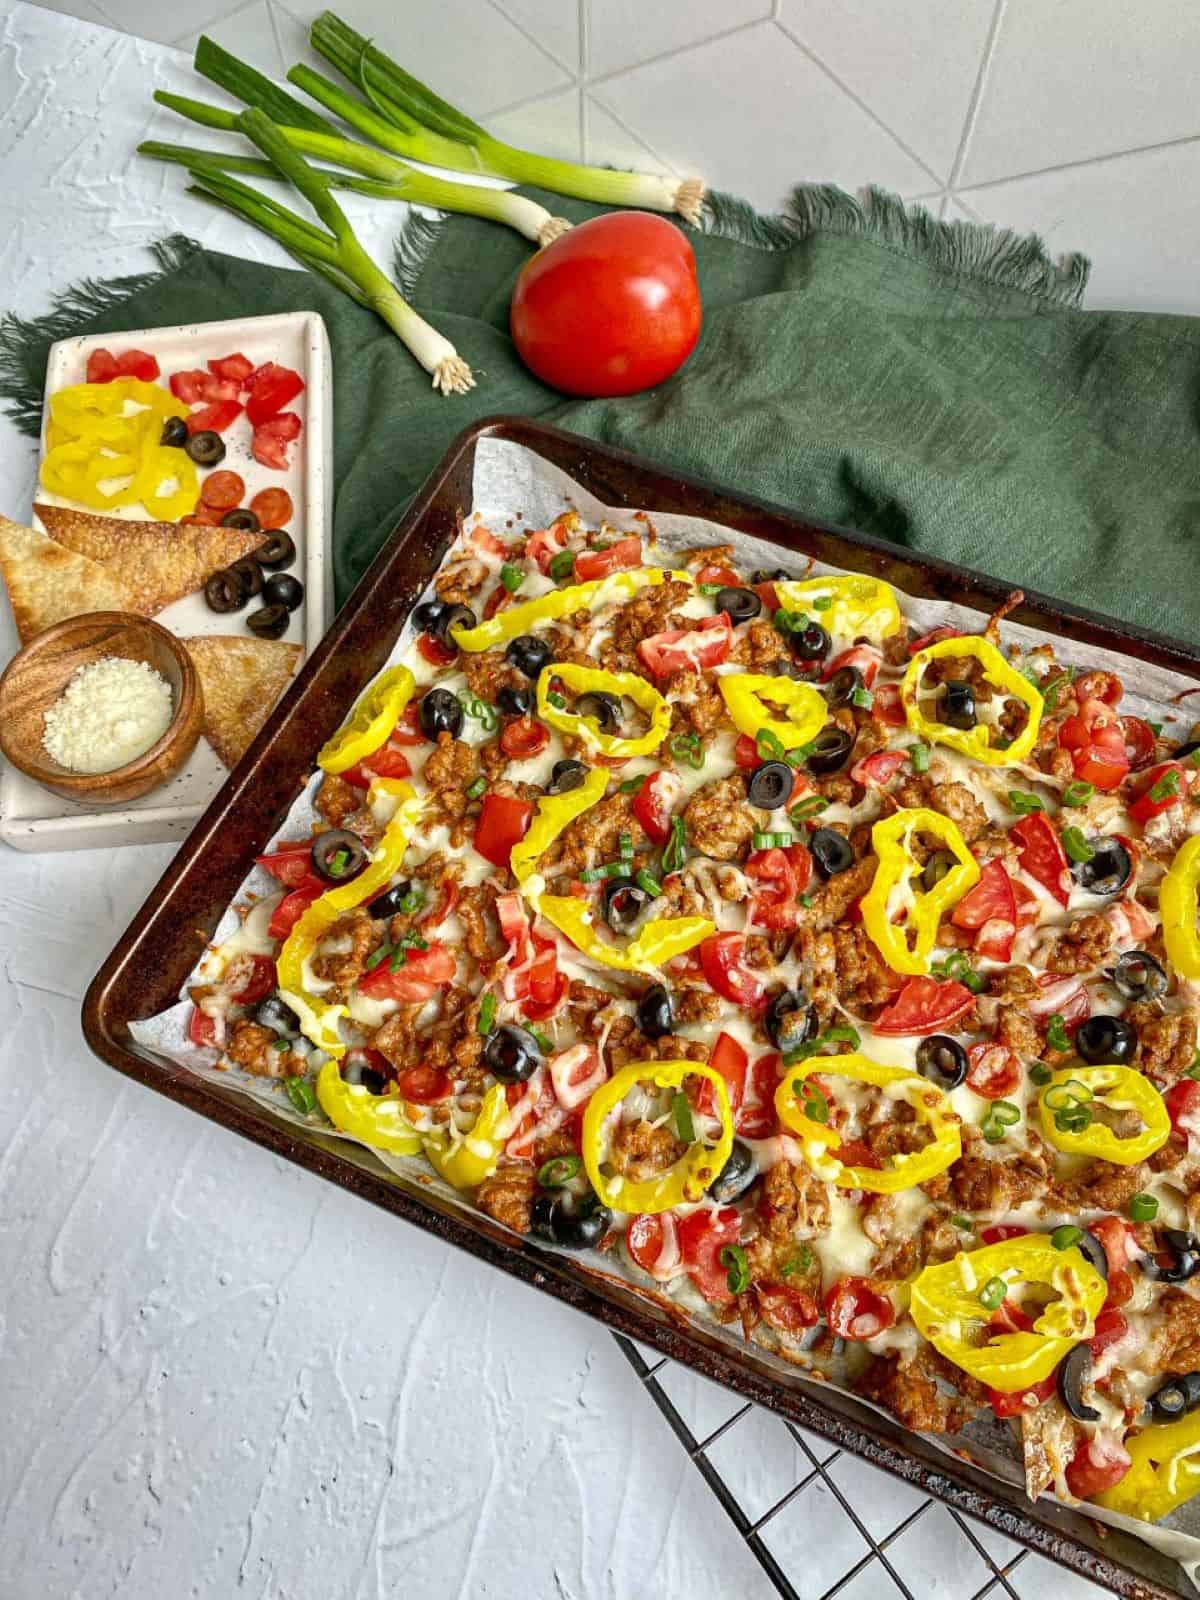 Sheet pan nachos topped with sausage, alfredo sauce, cheese, tomatoes, olives, and peppers. A tray with extra toppings, green onions, and grated cheese is next to the pan.